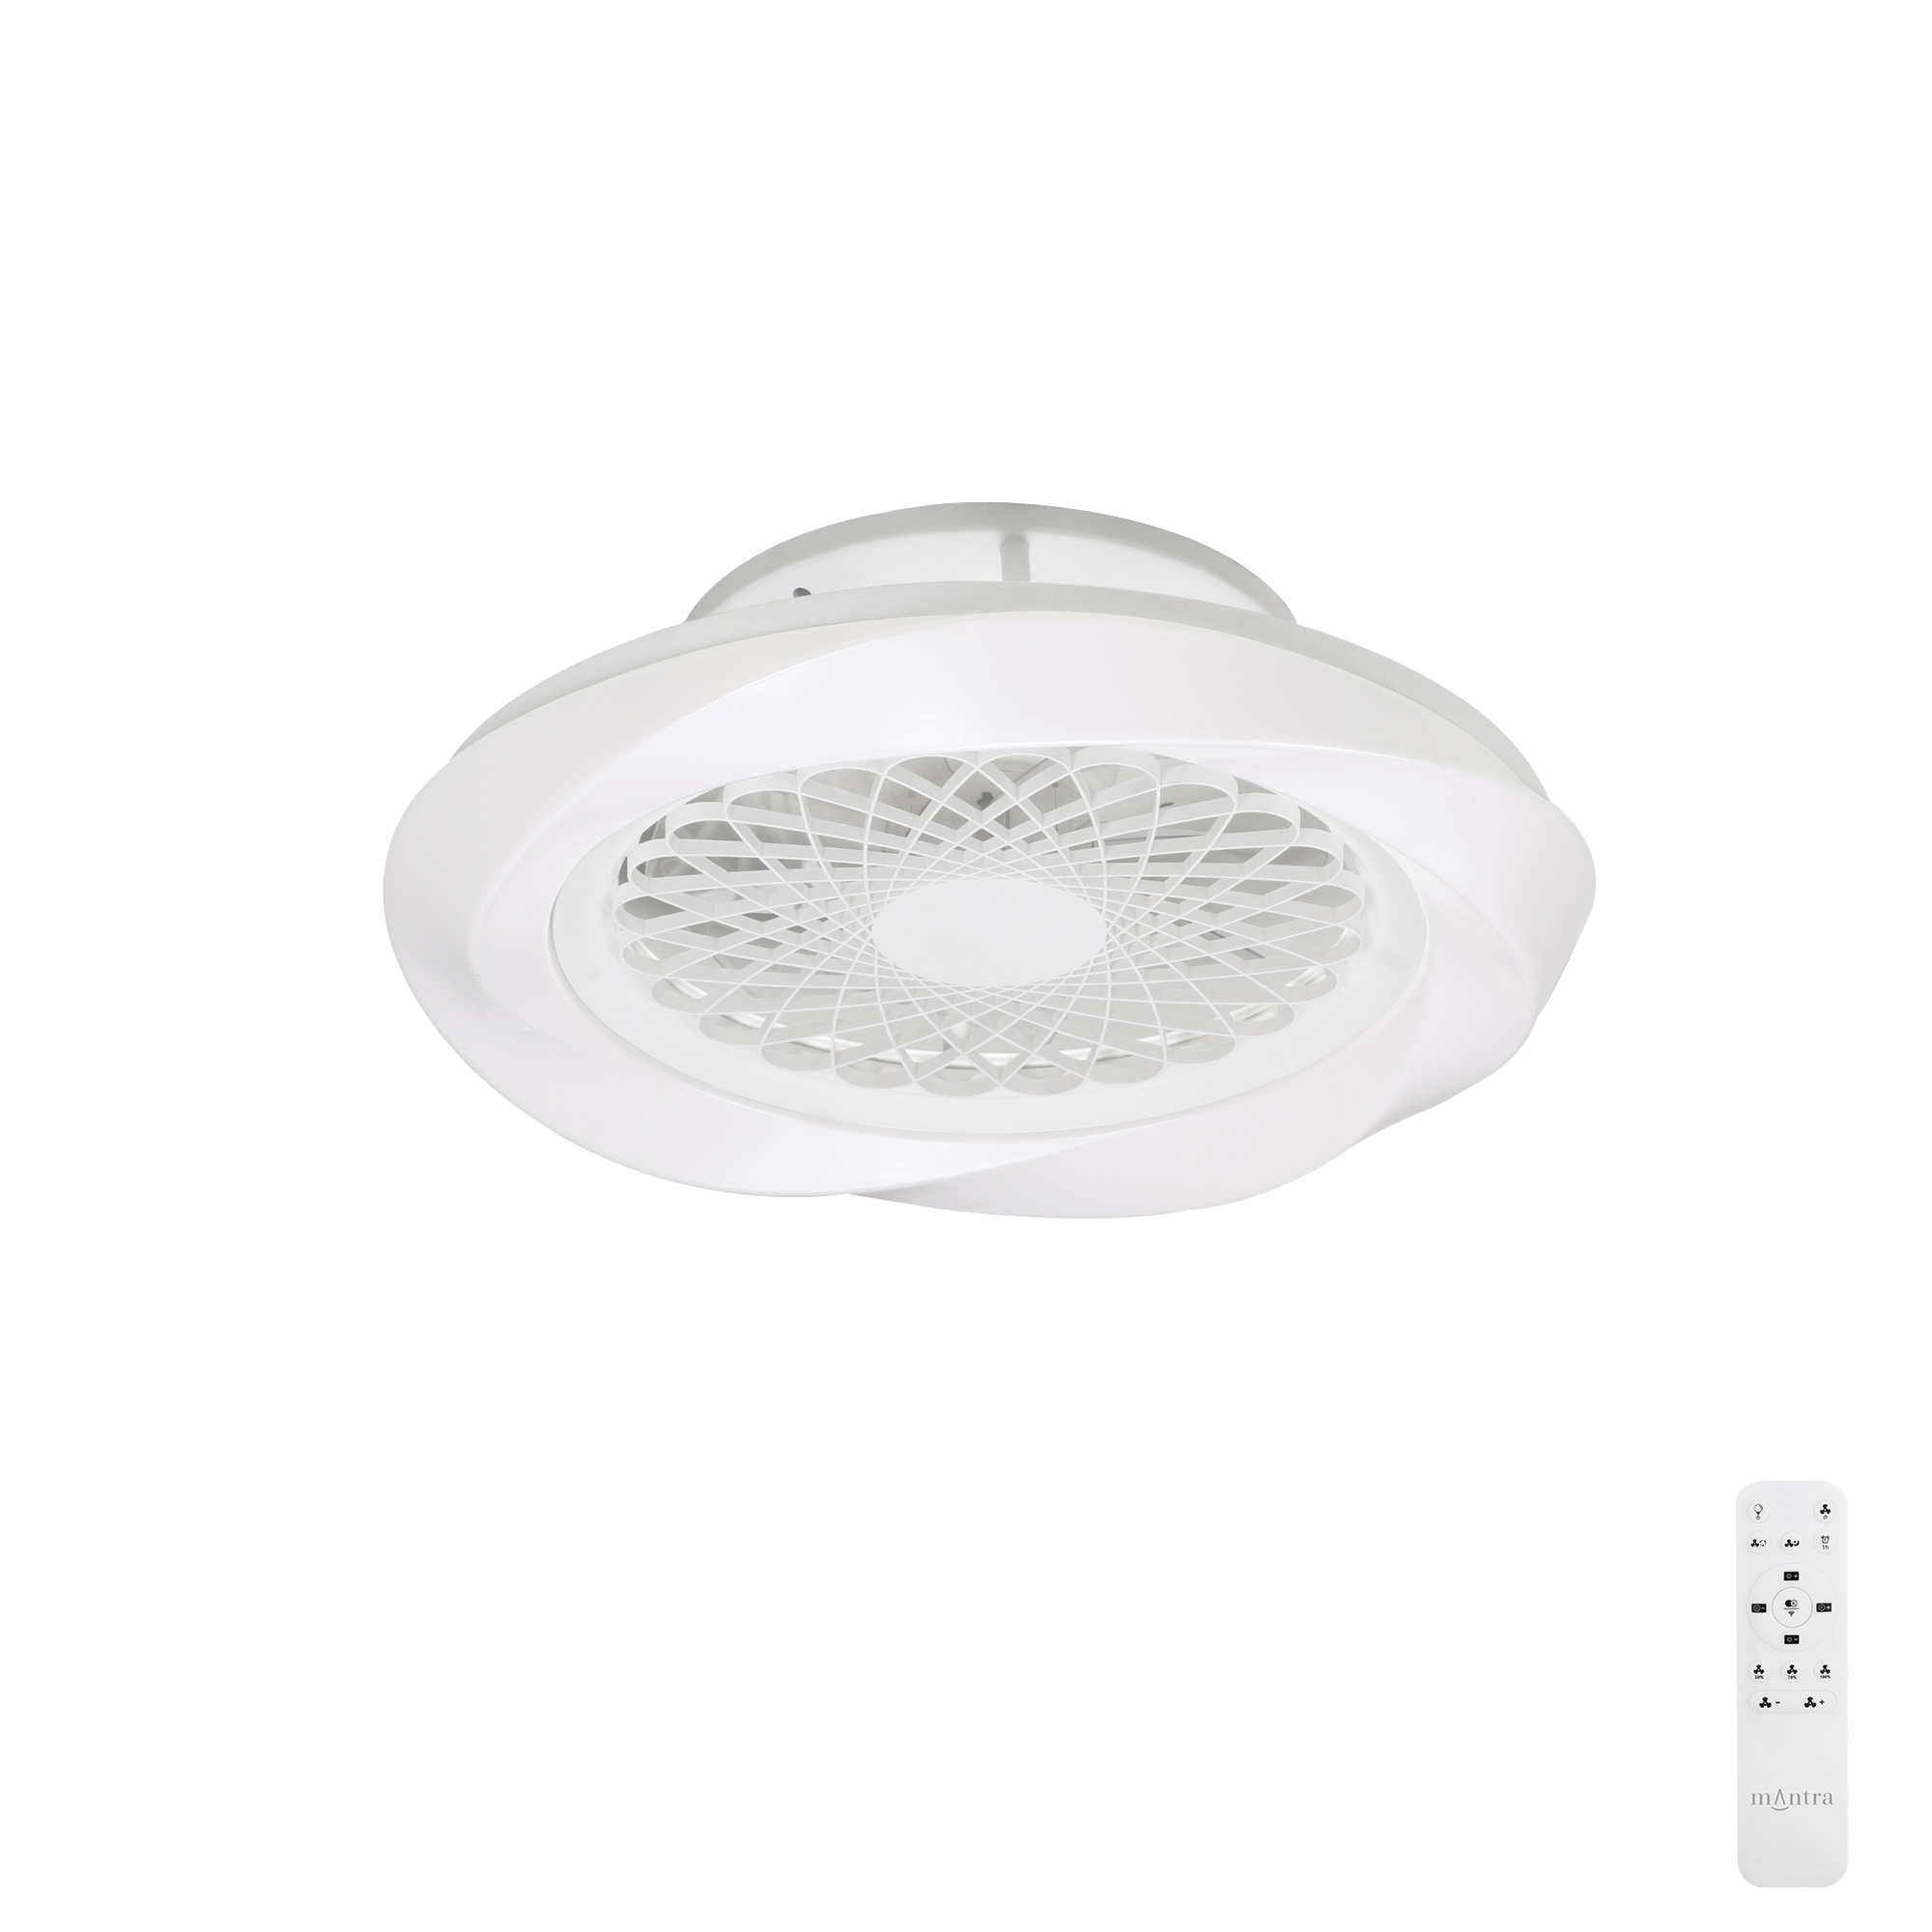 M7506  Boreal 70W LED Dimmable Ceiling Light & Fan; Remote Controlled White